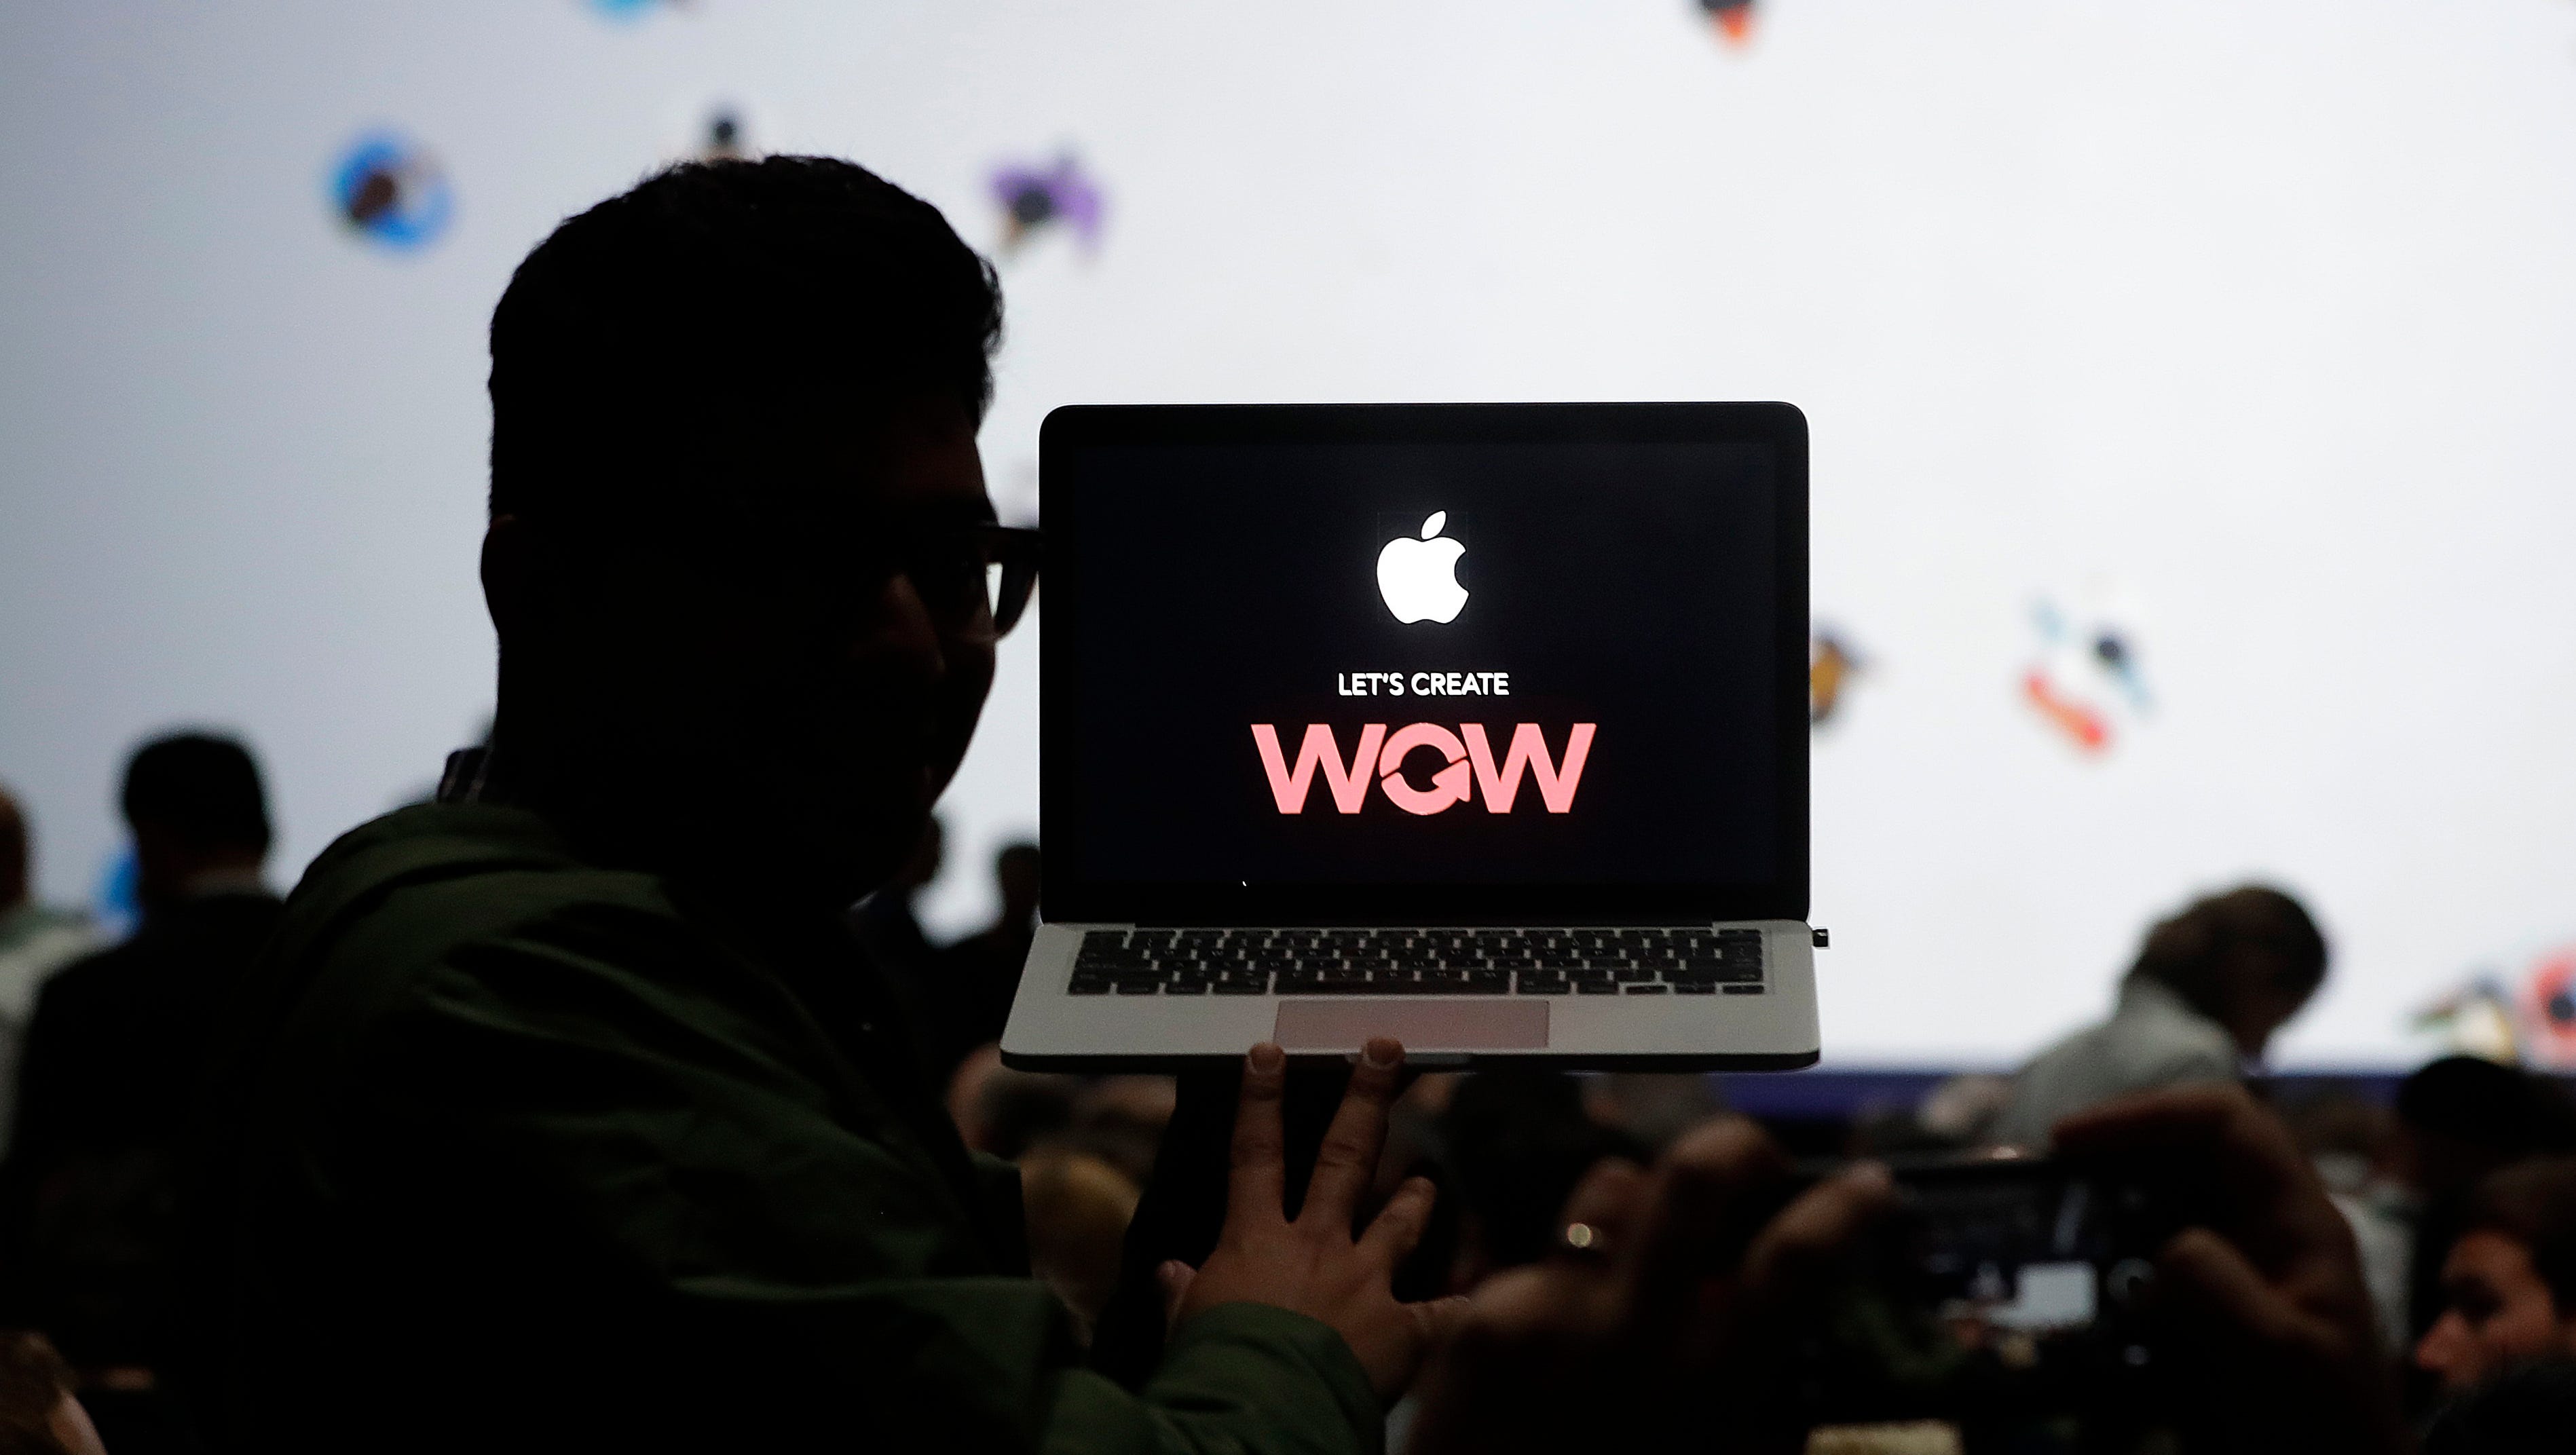 A man holds up a laptop computer before an announcement of new products at the Apple Worldwide Developers Conference in San Jose, Calif. onJune 5, 2017.